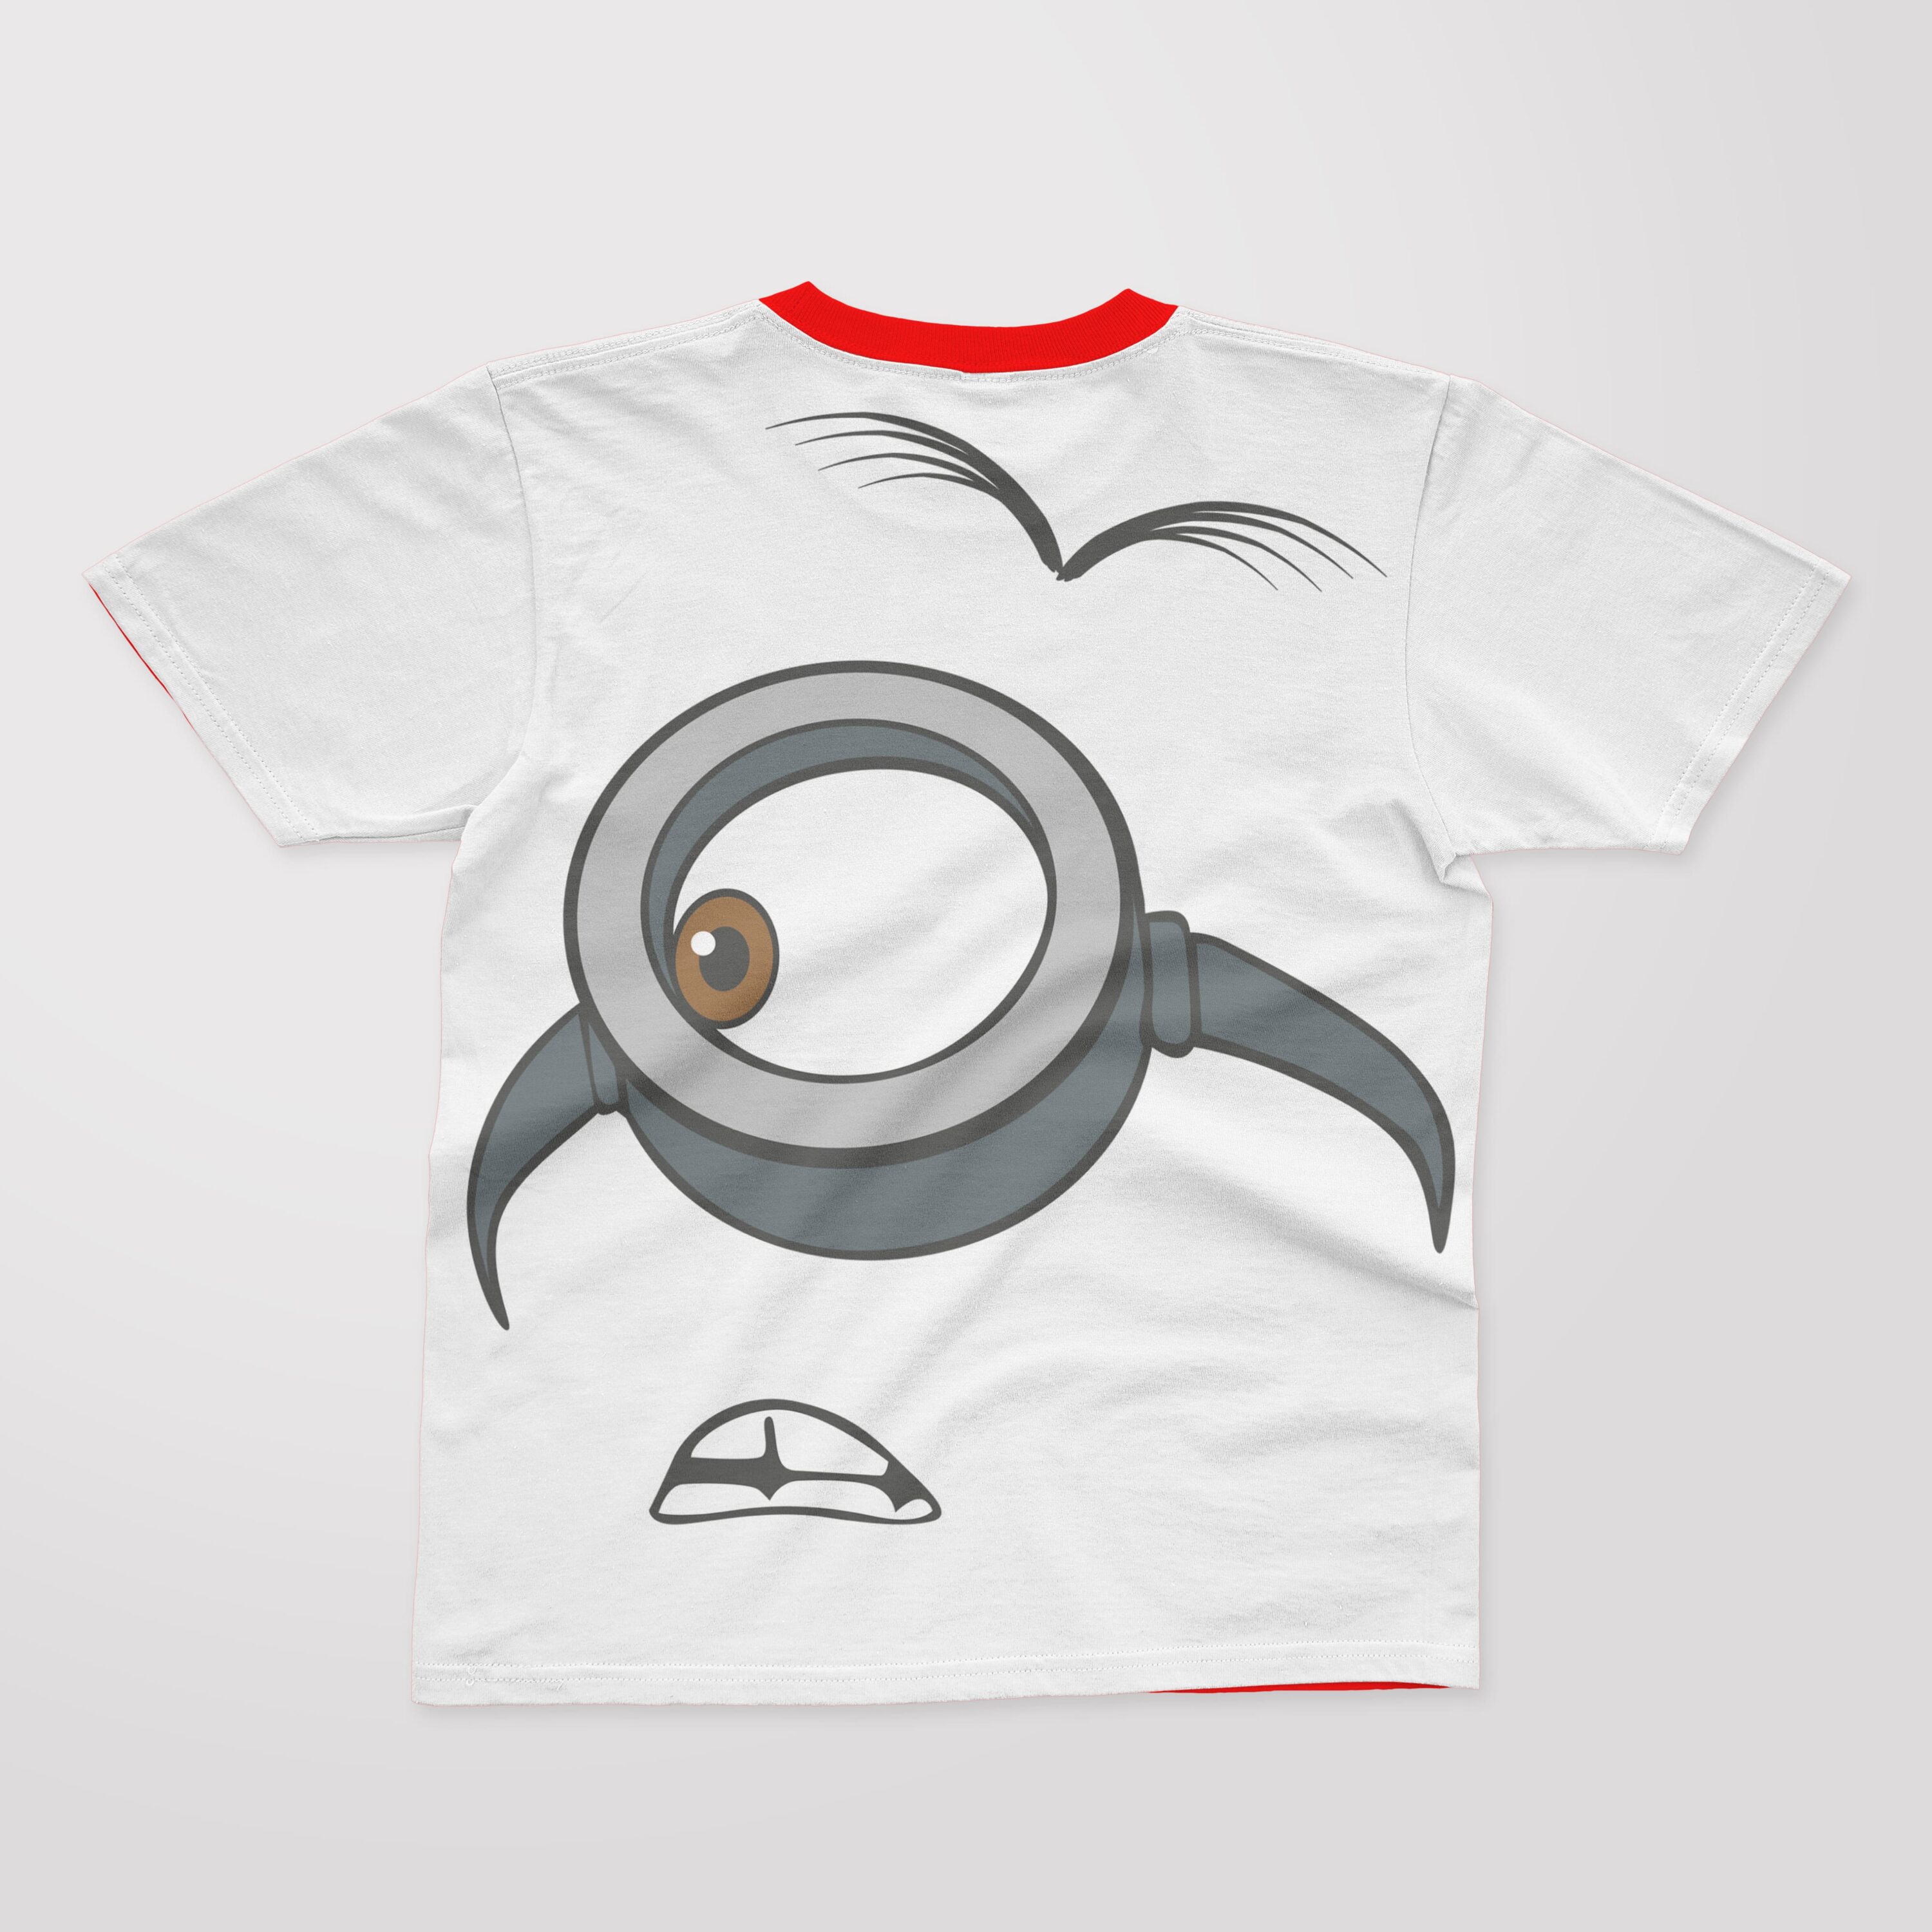 A white T-shirt with a red collar and a face of a surprised minion.